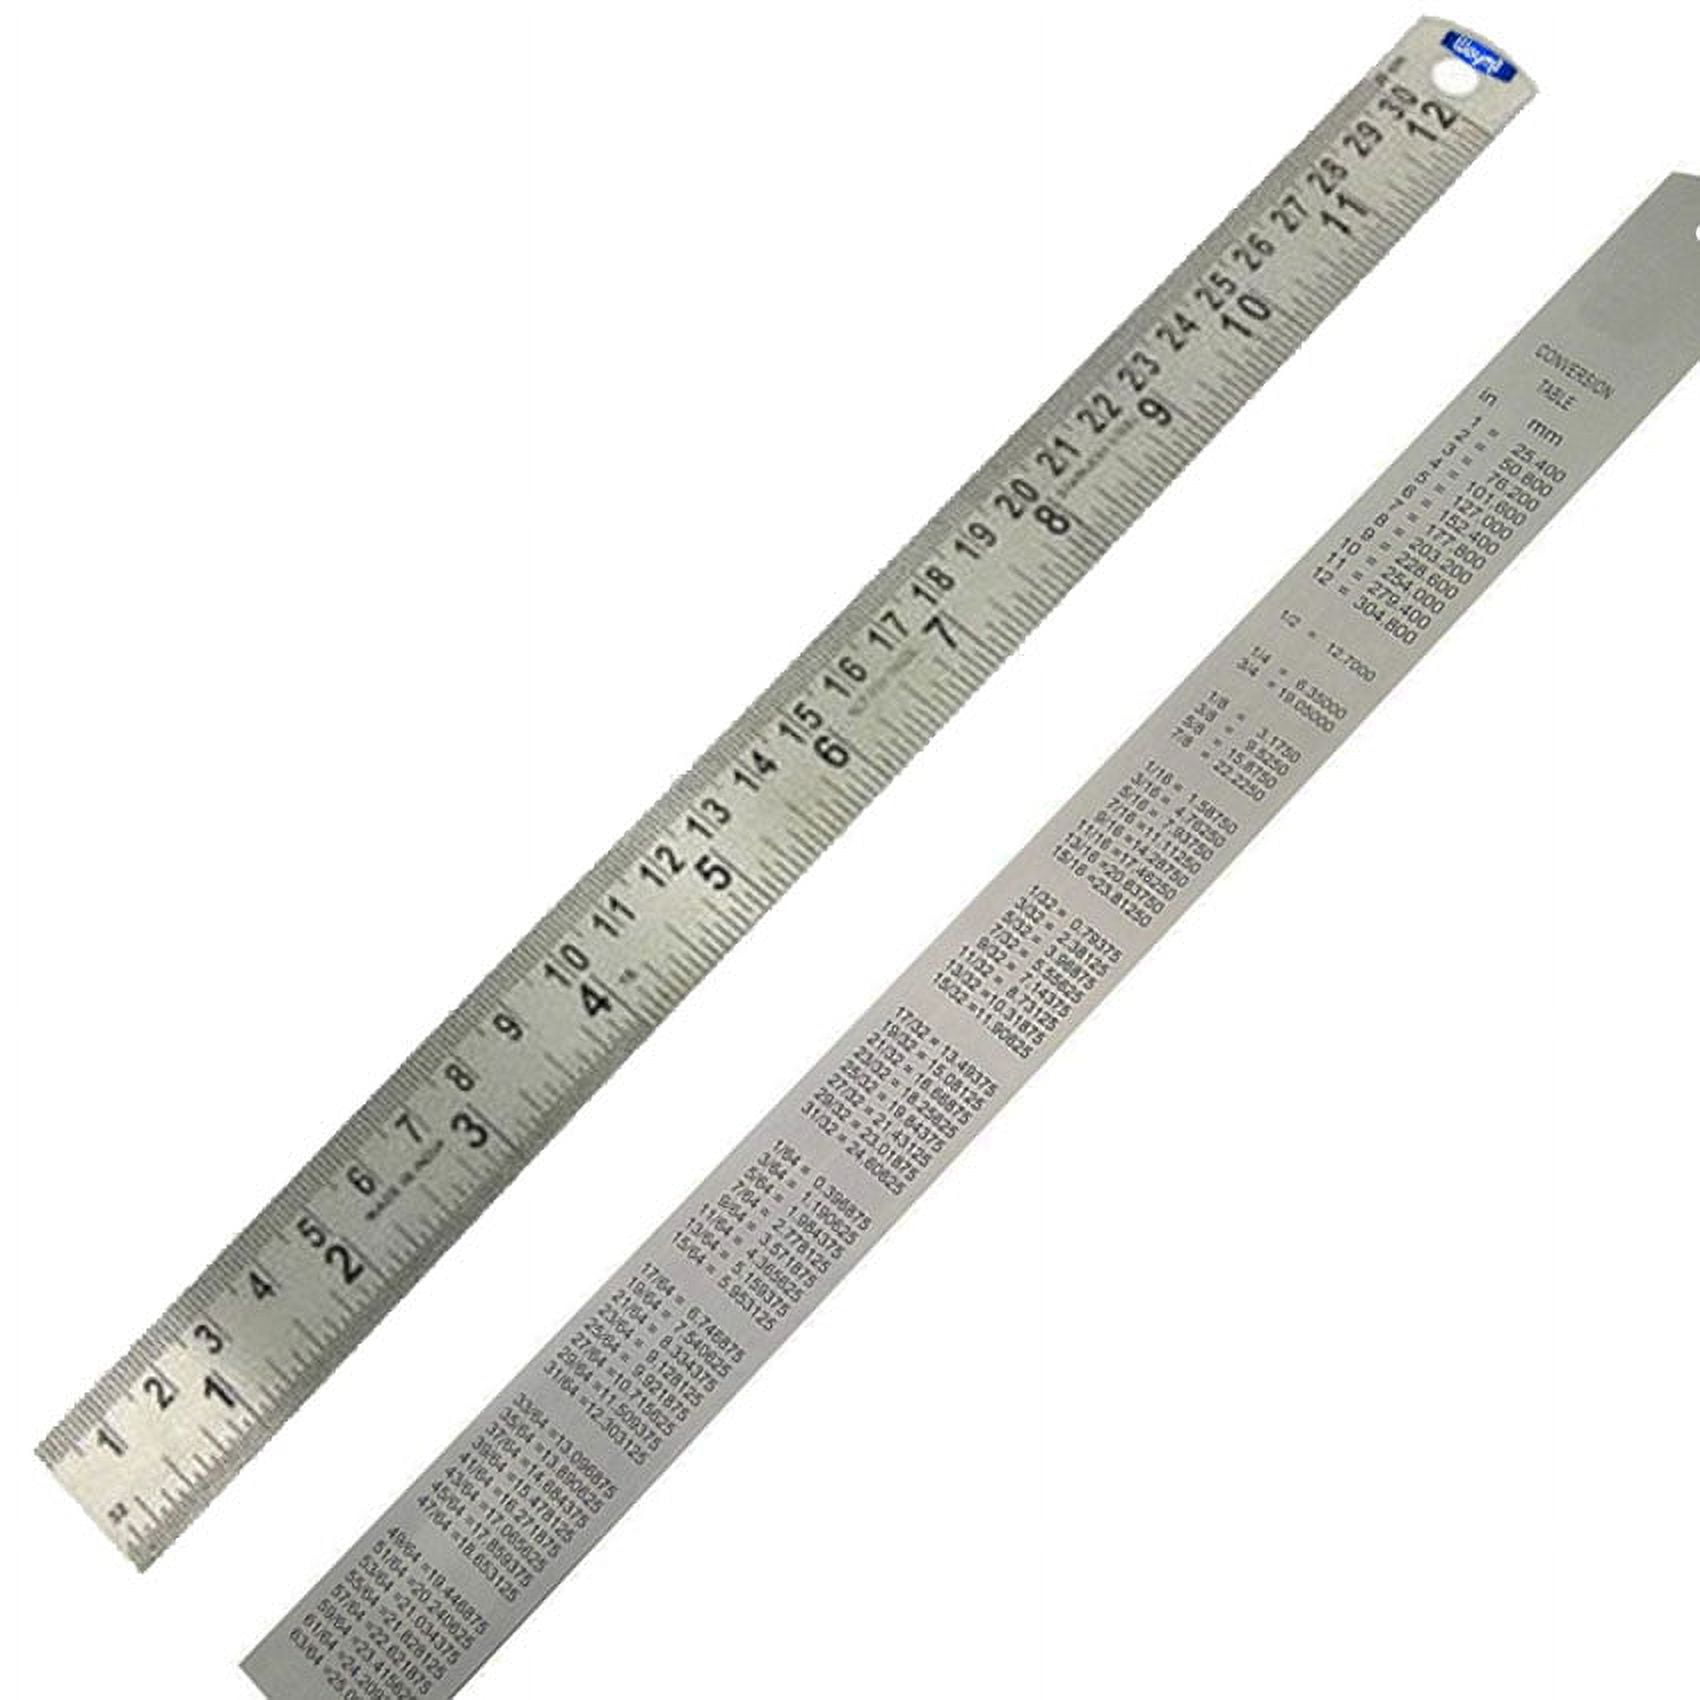 Stainless Steel Ruler and Metal Rule Kit with Conversion Table (Silver, 12  Inch, 6 Inch) 